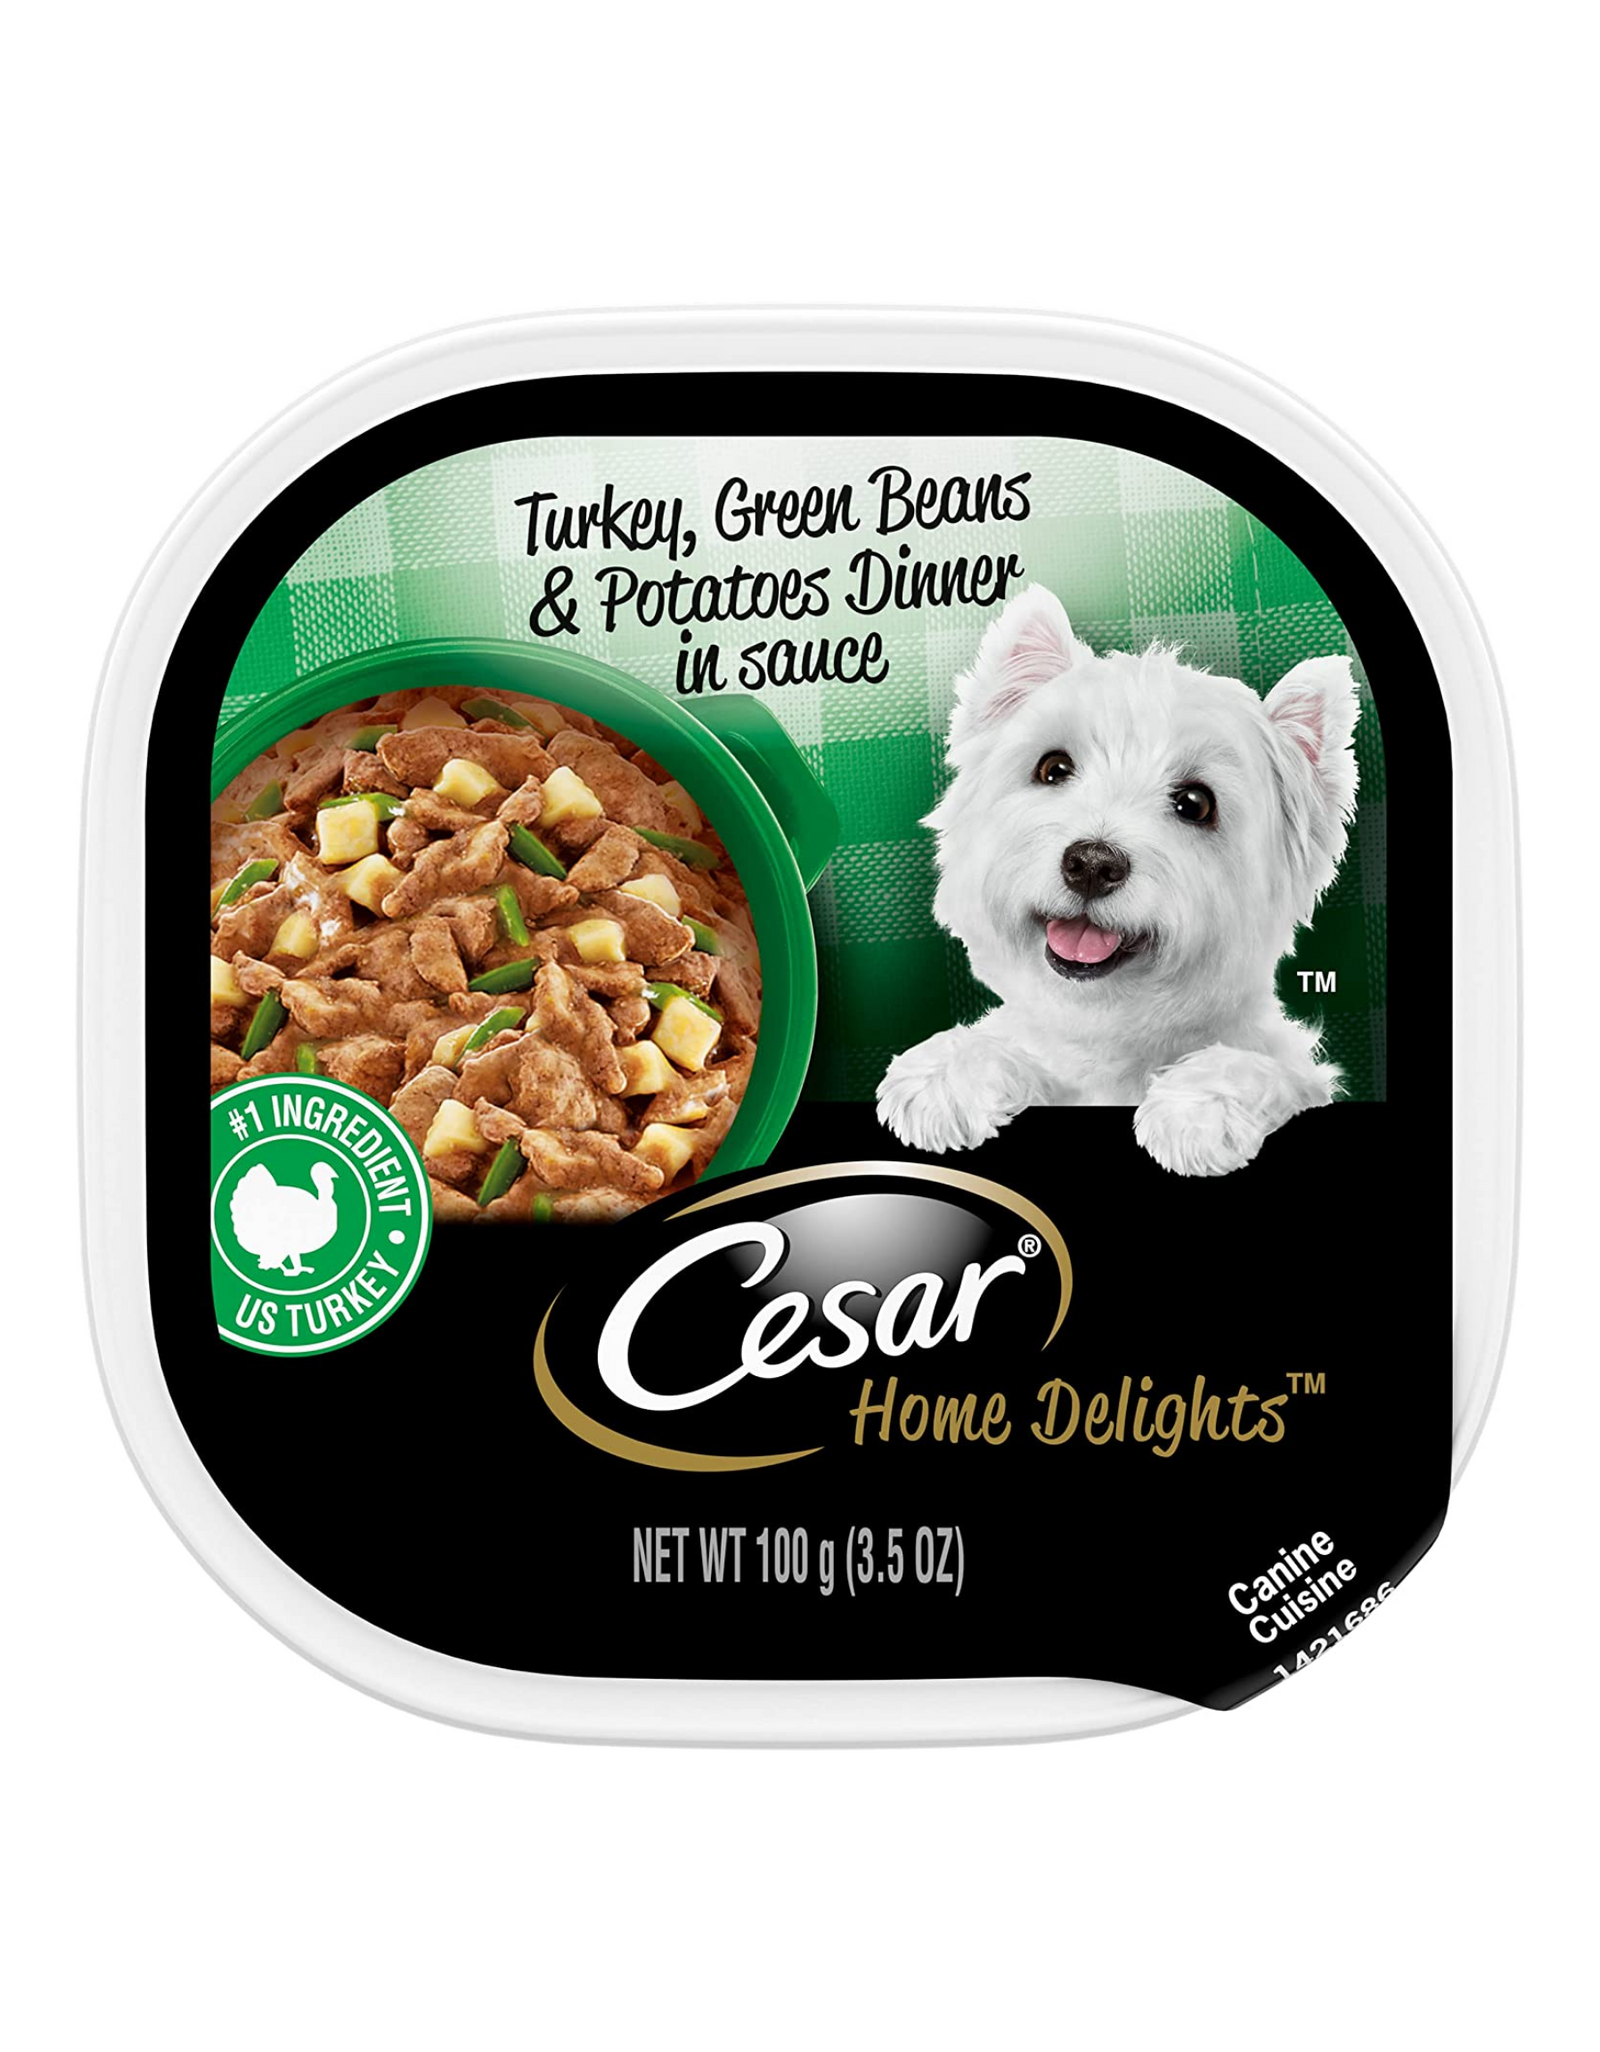 CESAR HOME DELIGHTS Turkey, Green Beans & Potatoes Dinner in Sauce, 3.5 oz, 24 Count